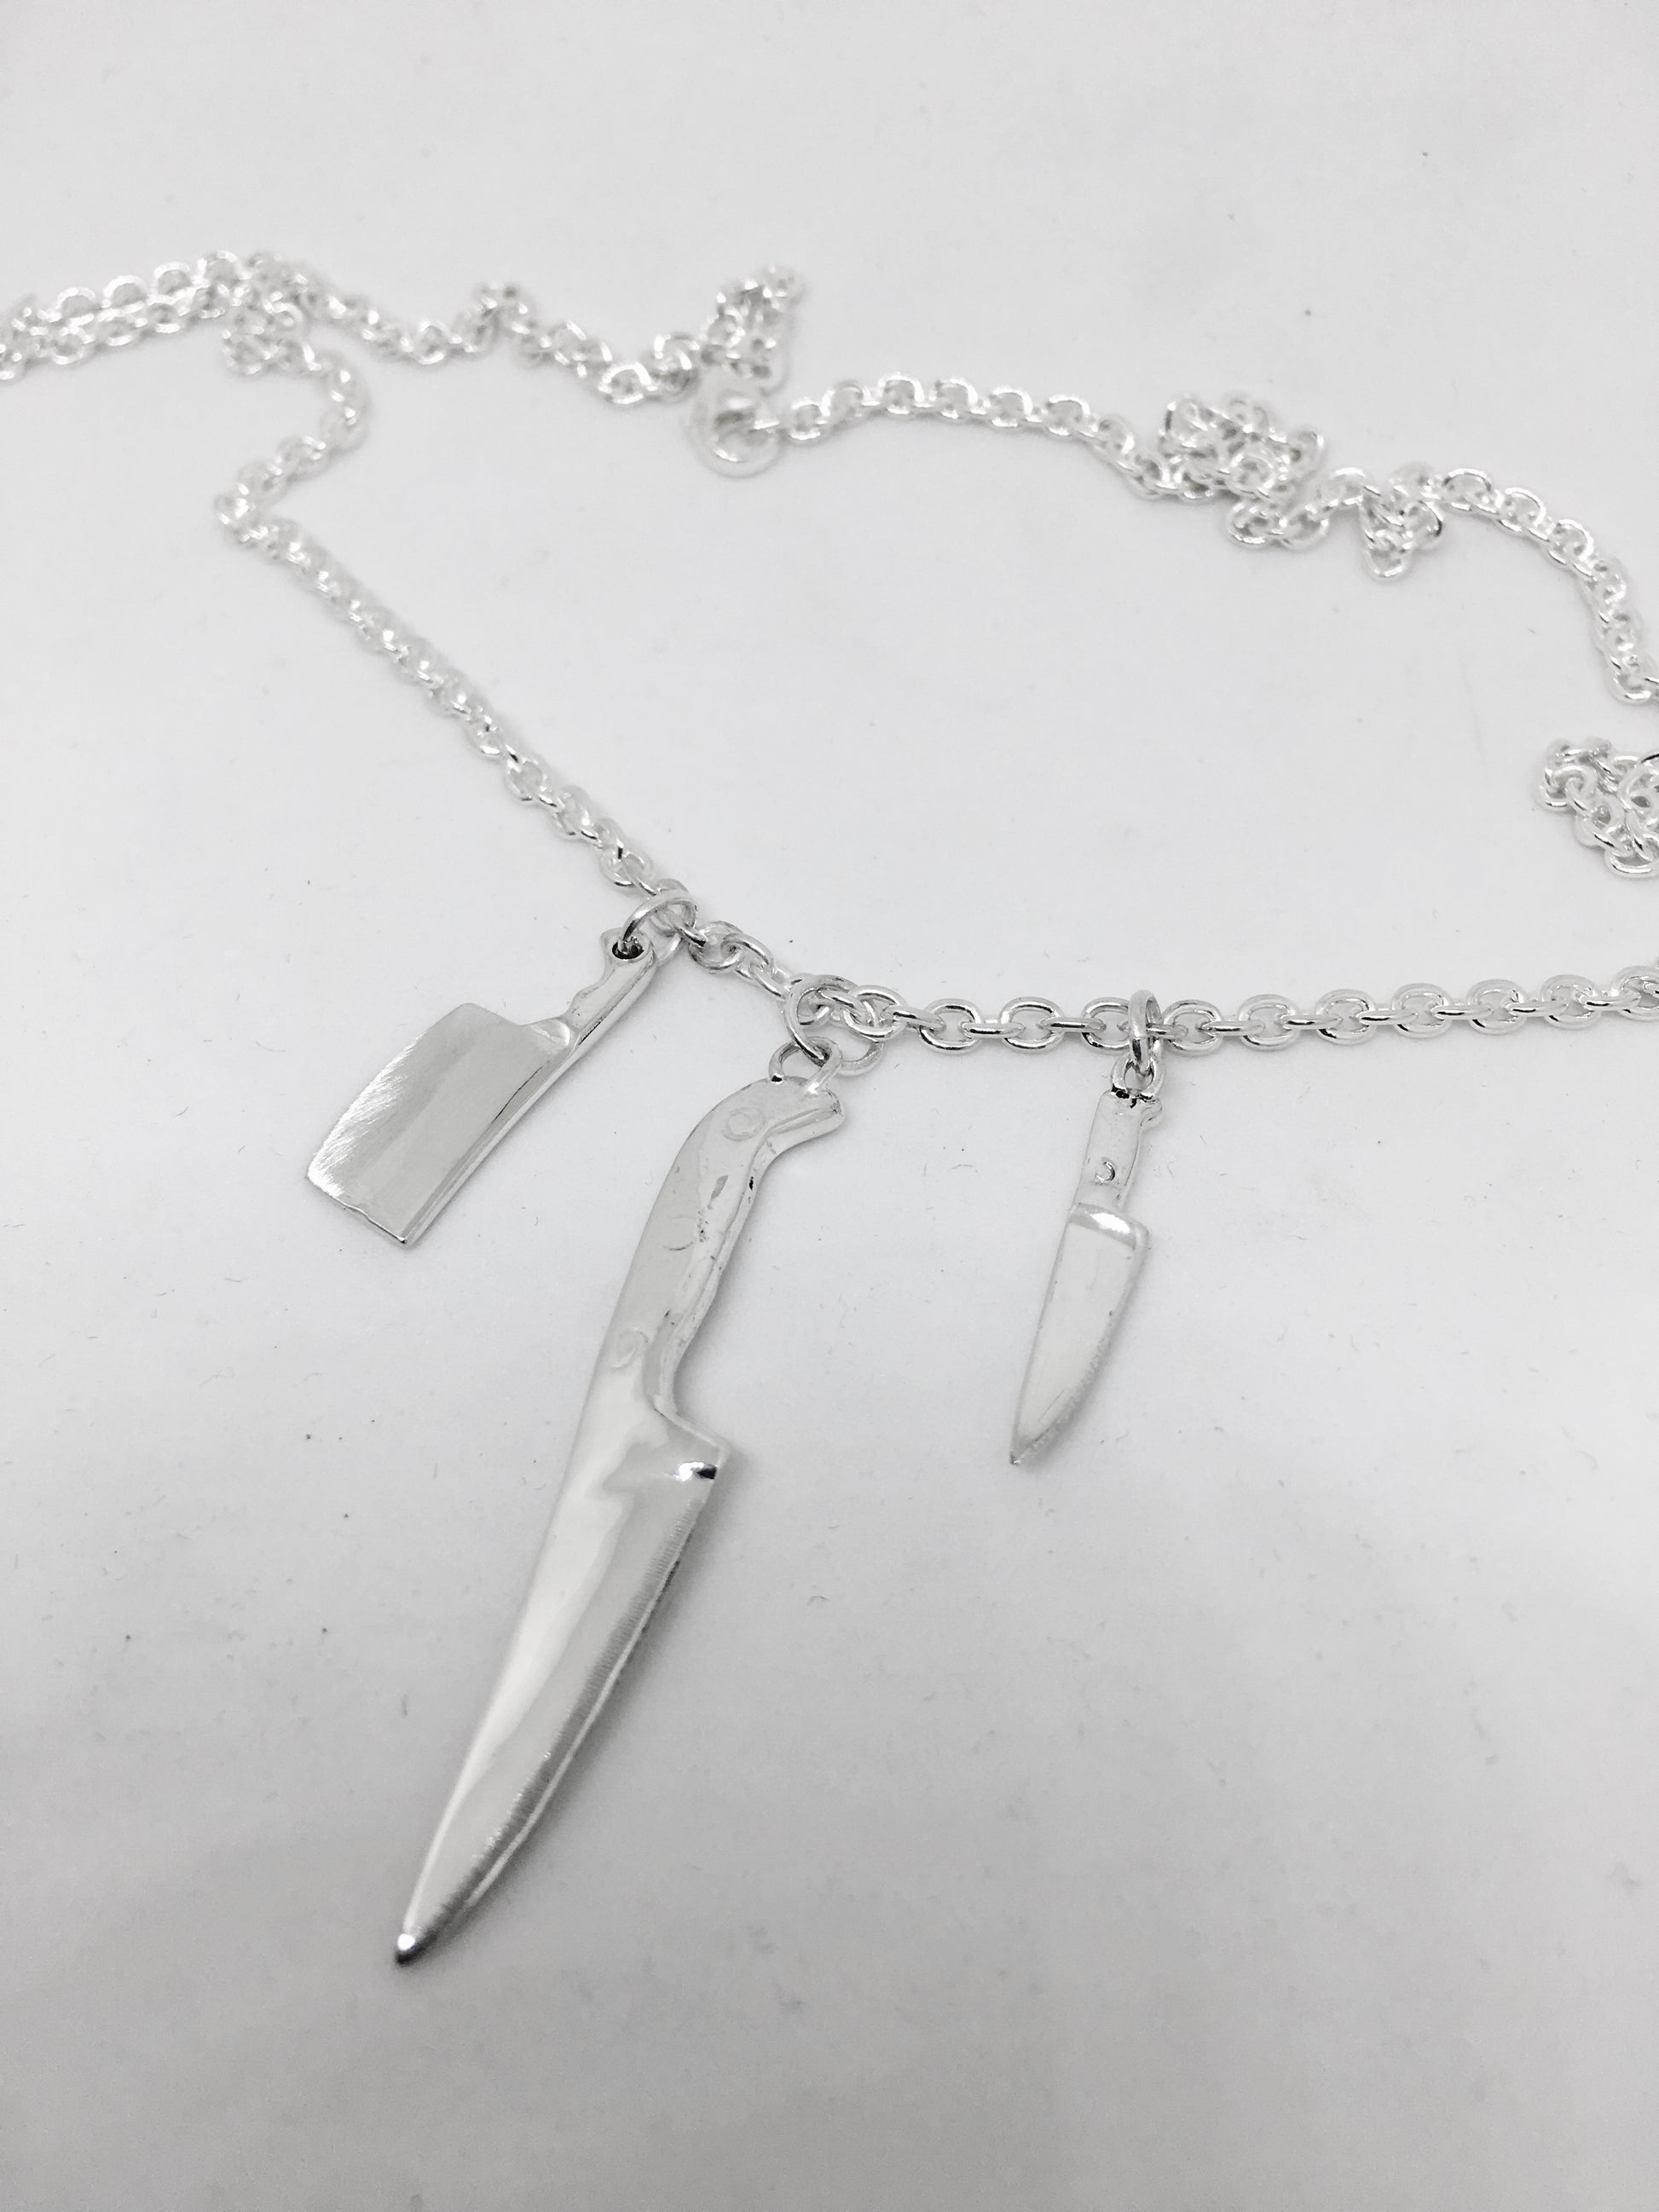 the triple knife necklace has a lobster clasp